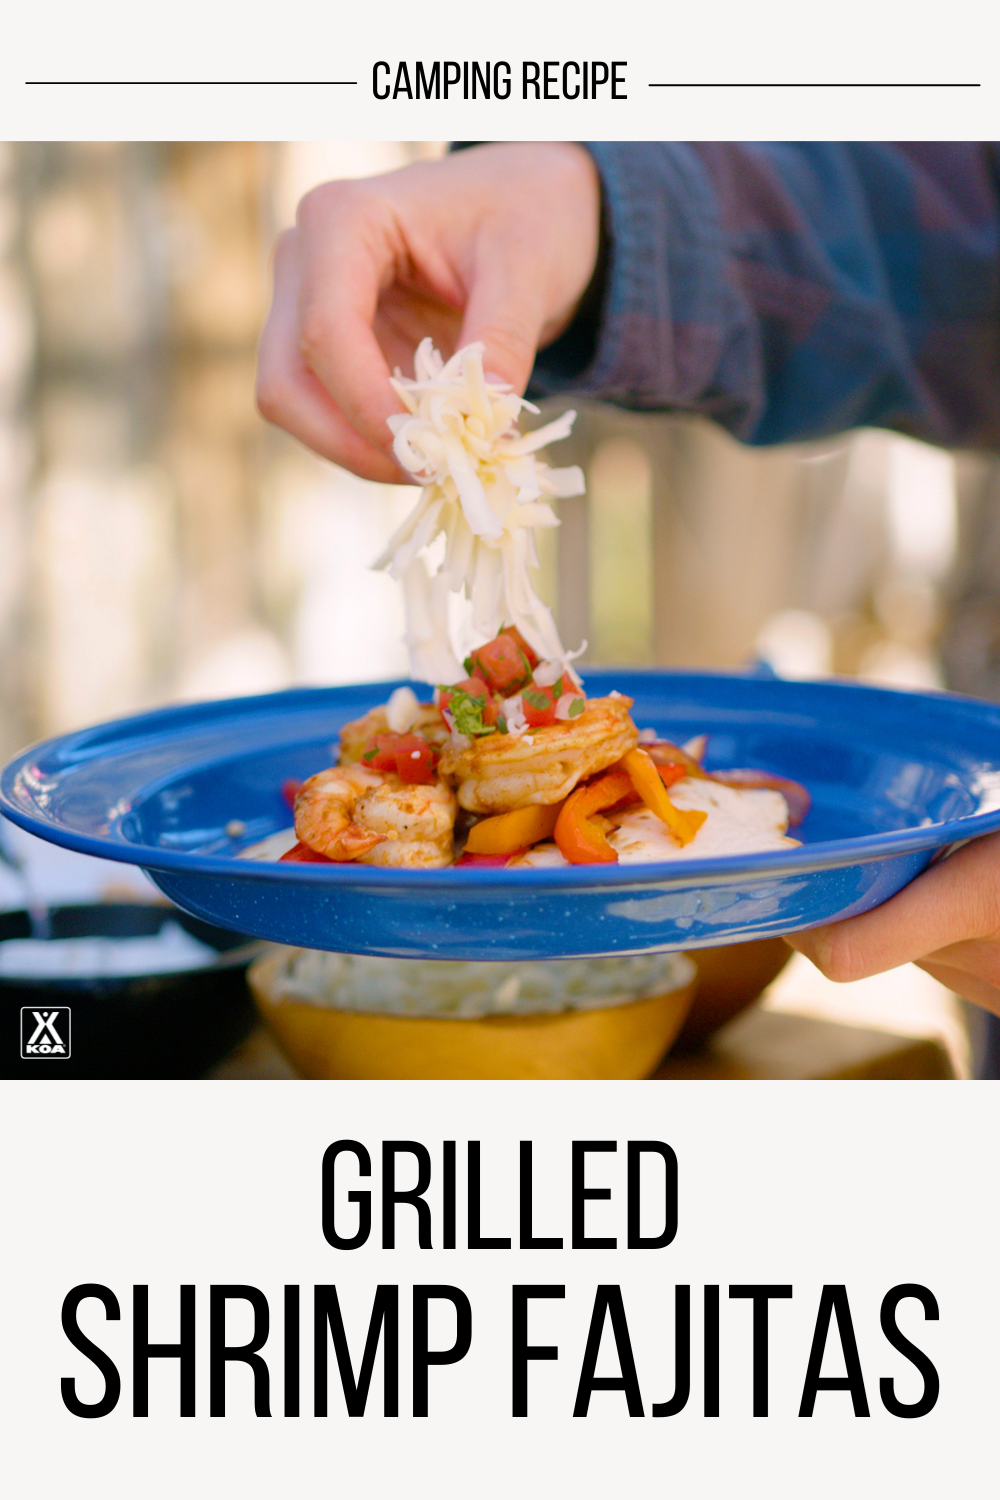 Quick, colorful and delicious, these easy shrimp fajitas are sure to please the hungriest of campers.